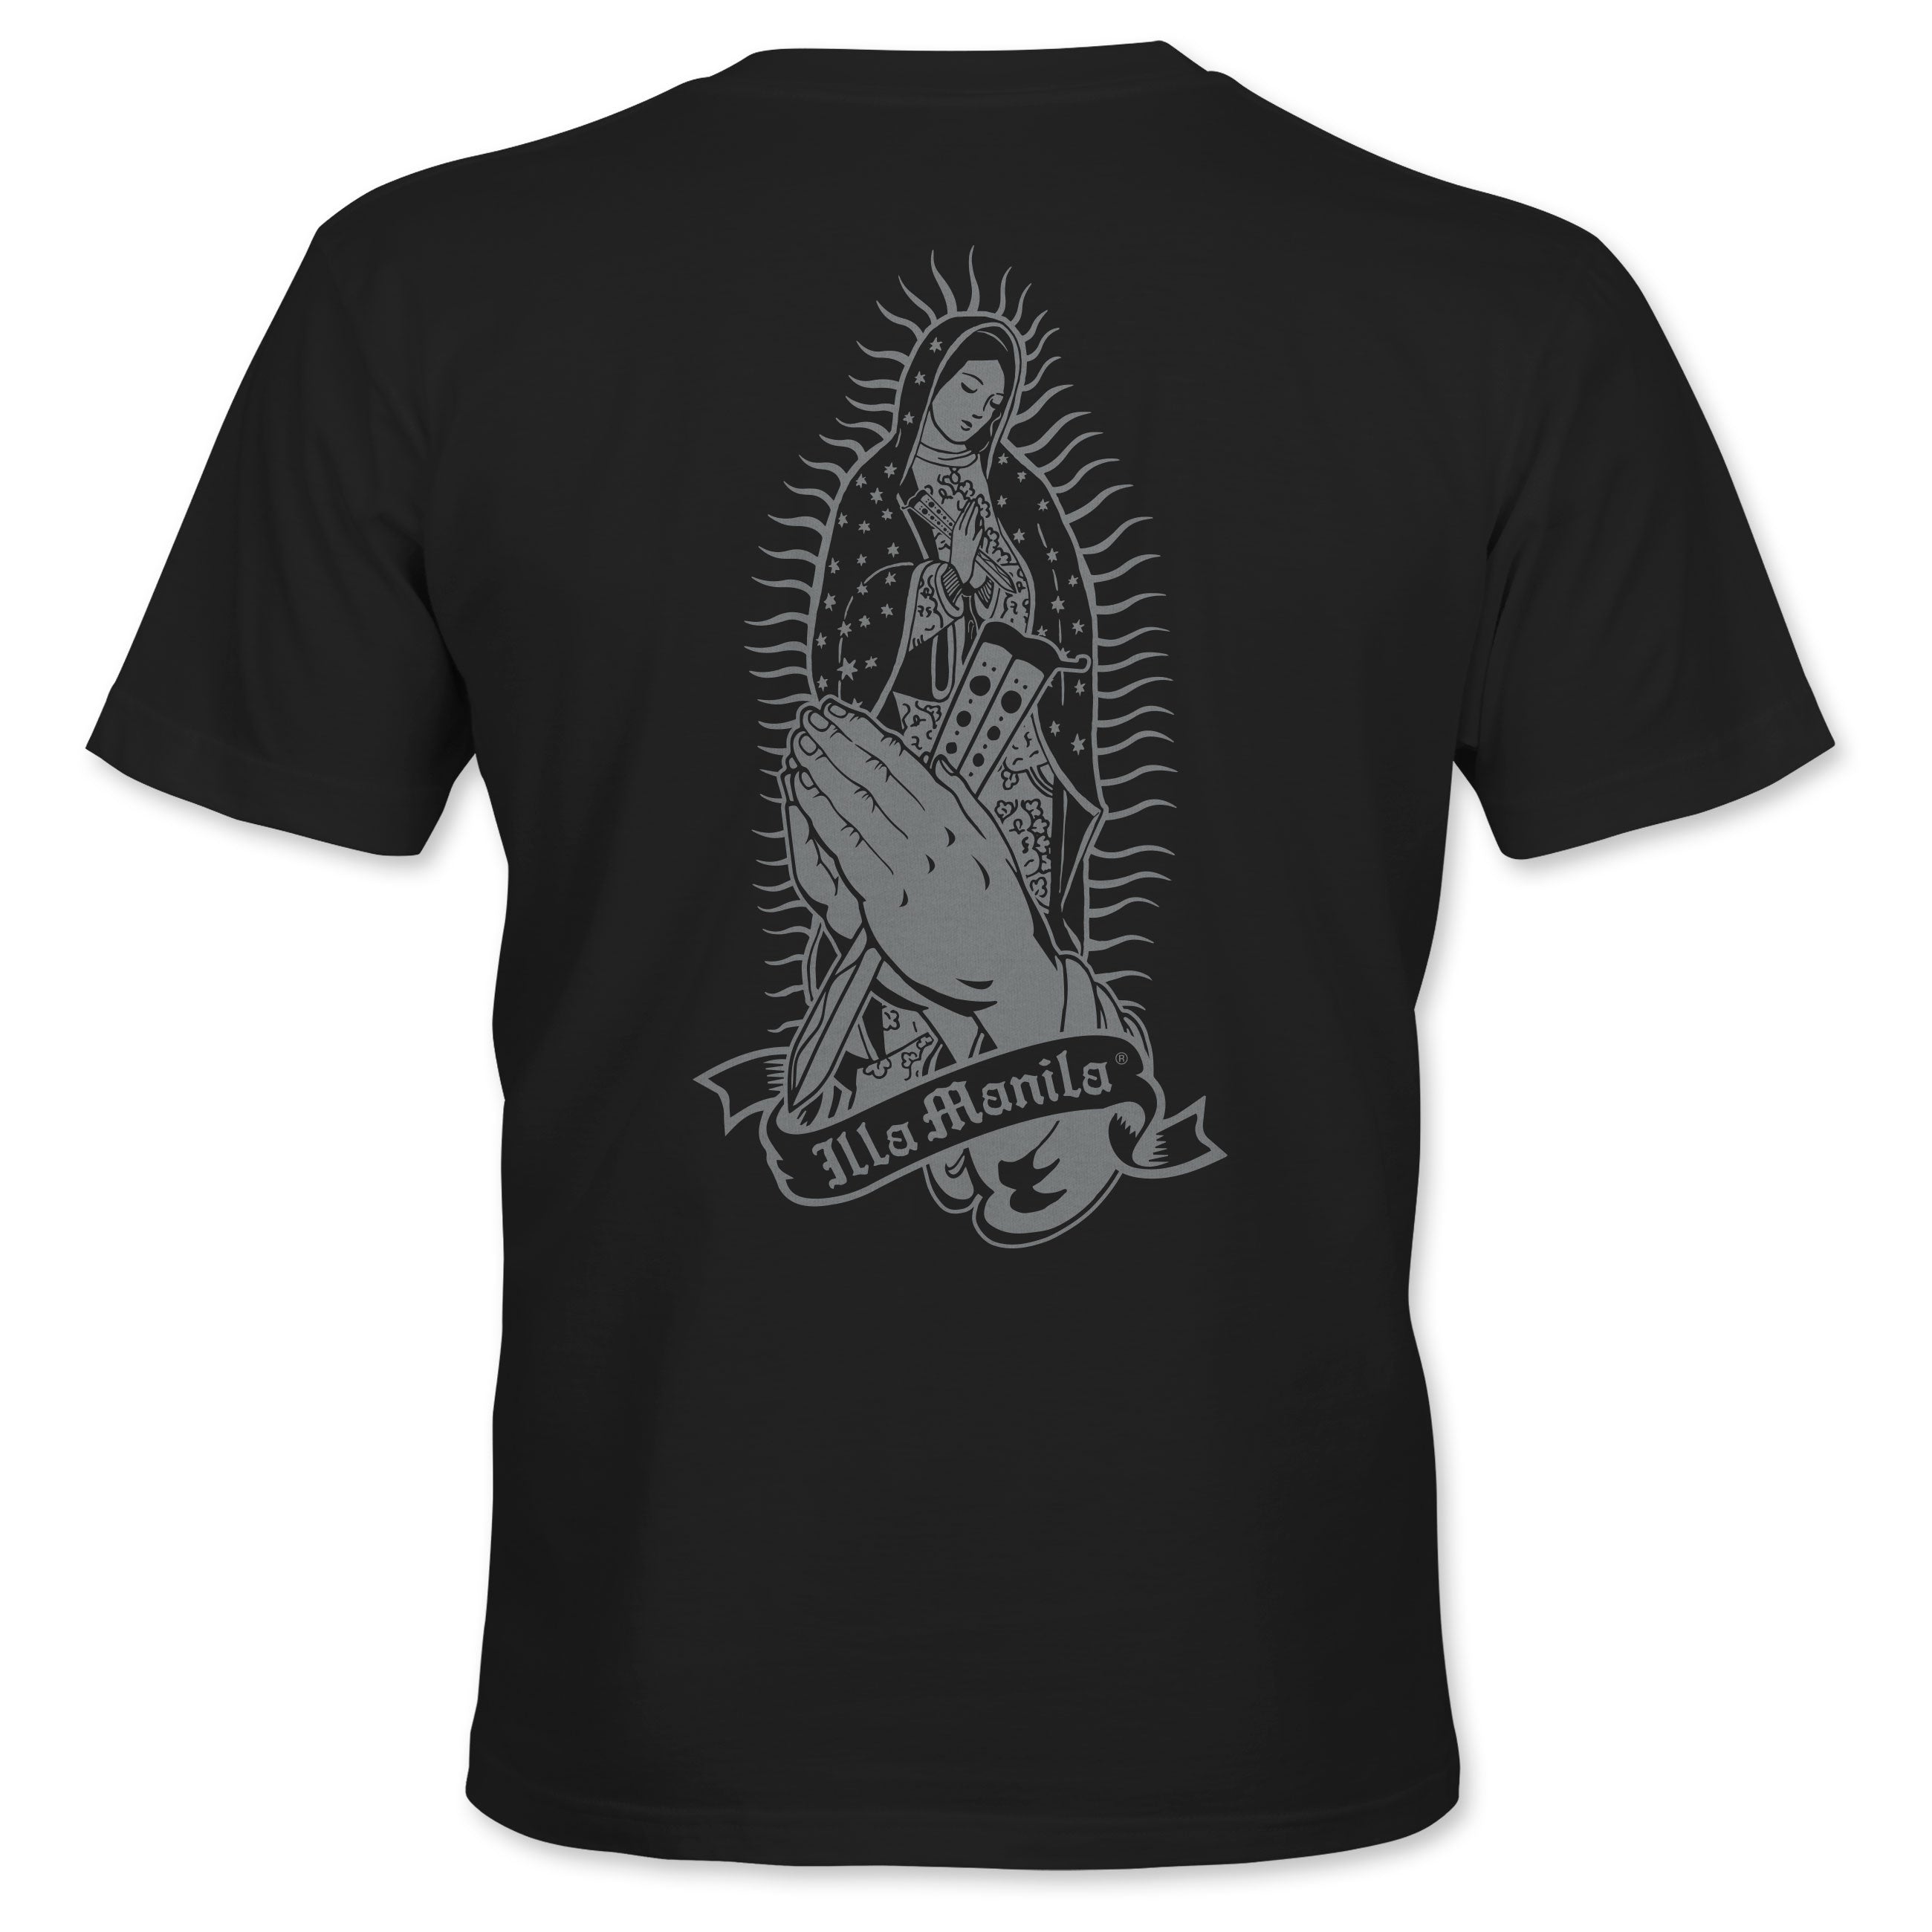 Our Lady Praying Hands T-shirt - Black